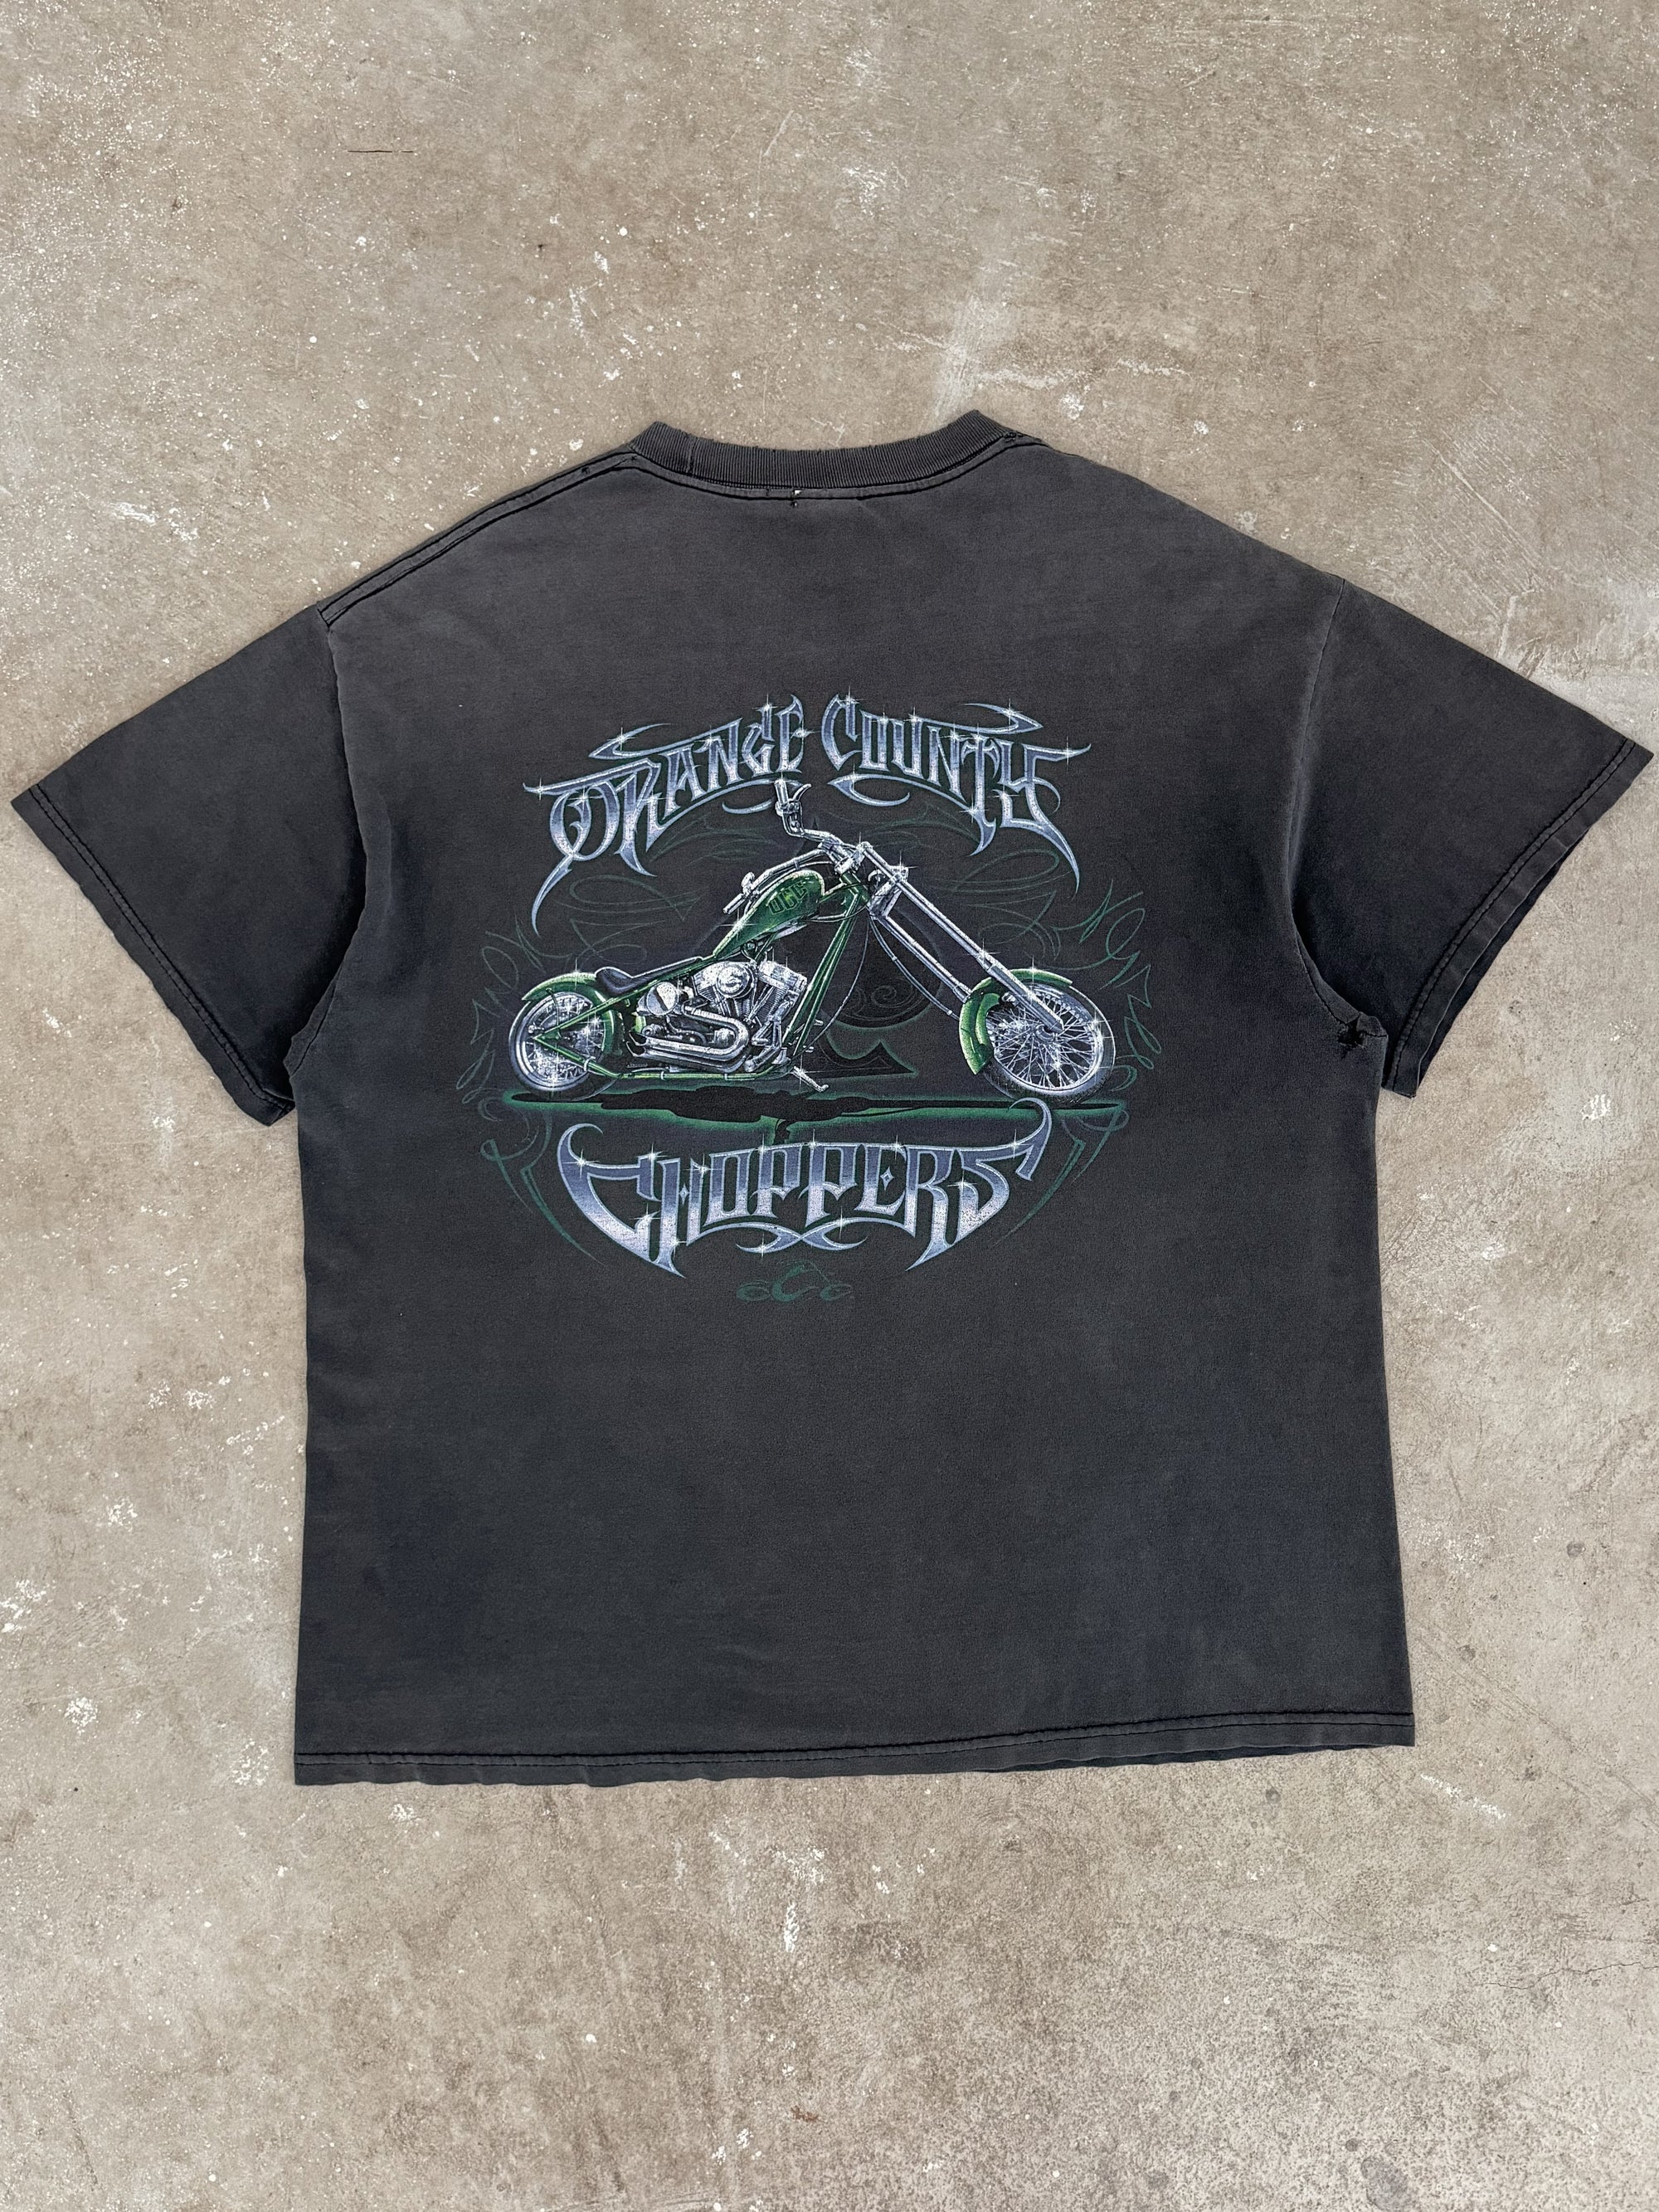 2000s "Orange County Choppers" Distressed Faded Tee (XL)